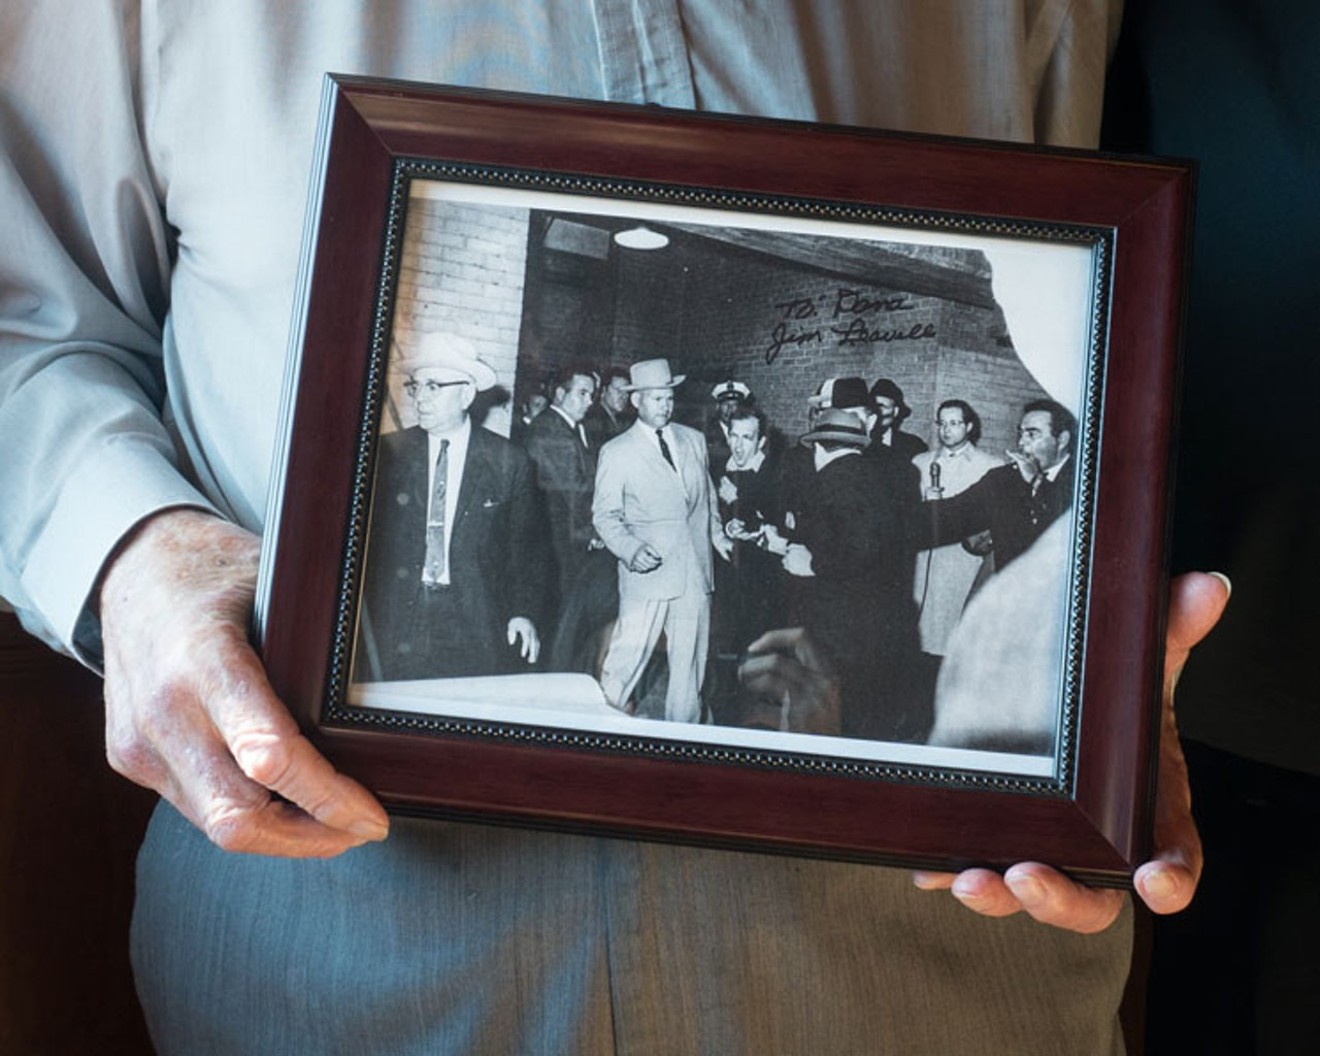 Former homicide detective Jim Leavelle was handcuffed to Lee Harvey Oswald the day Jack Ruby shot Oswald. He's holding Bob Jackson's famous photograph immortalizing the moment.